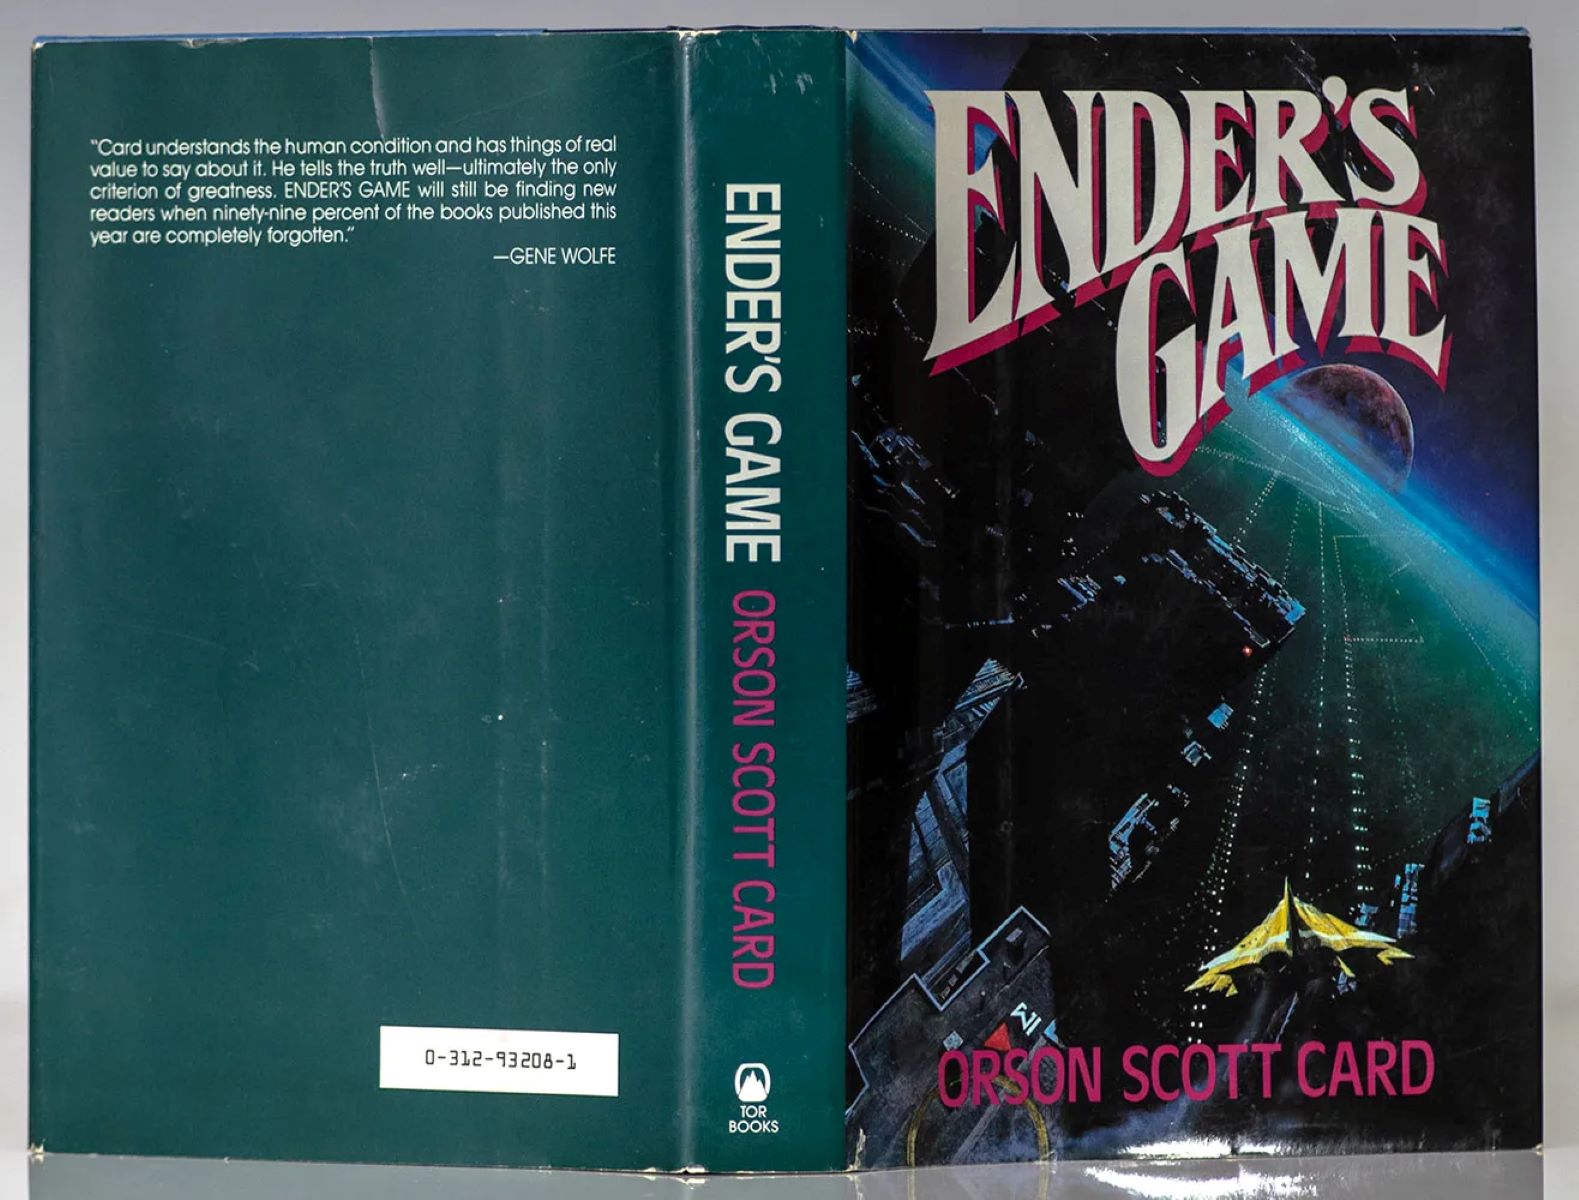 9-astonishing-facts-about-enders-game-by-orson-scott-card